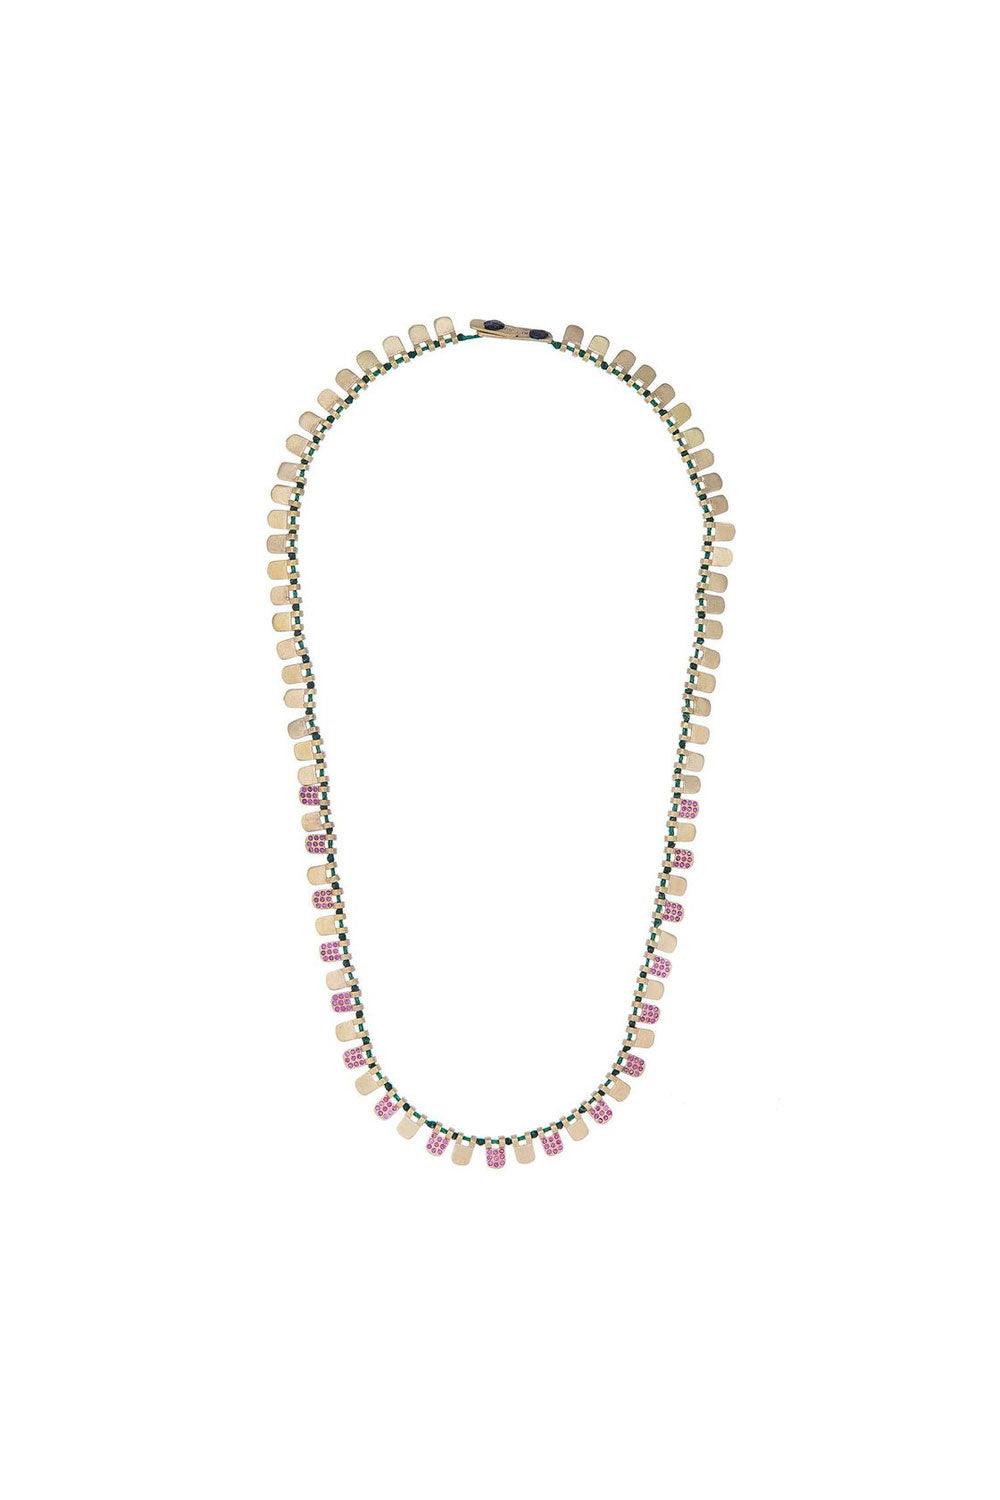 JUJU | Summer Necklace with Stones CNS-451 1 | Milagron